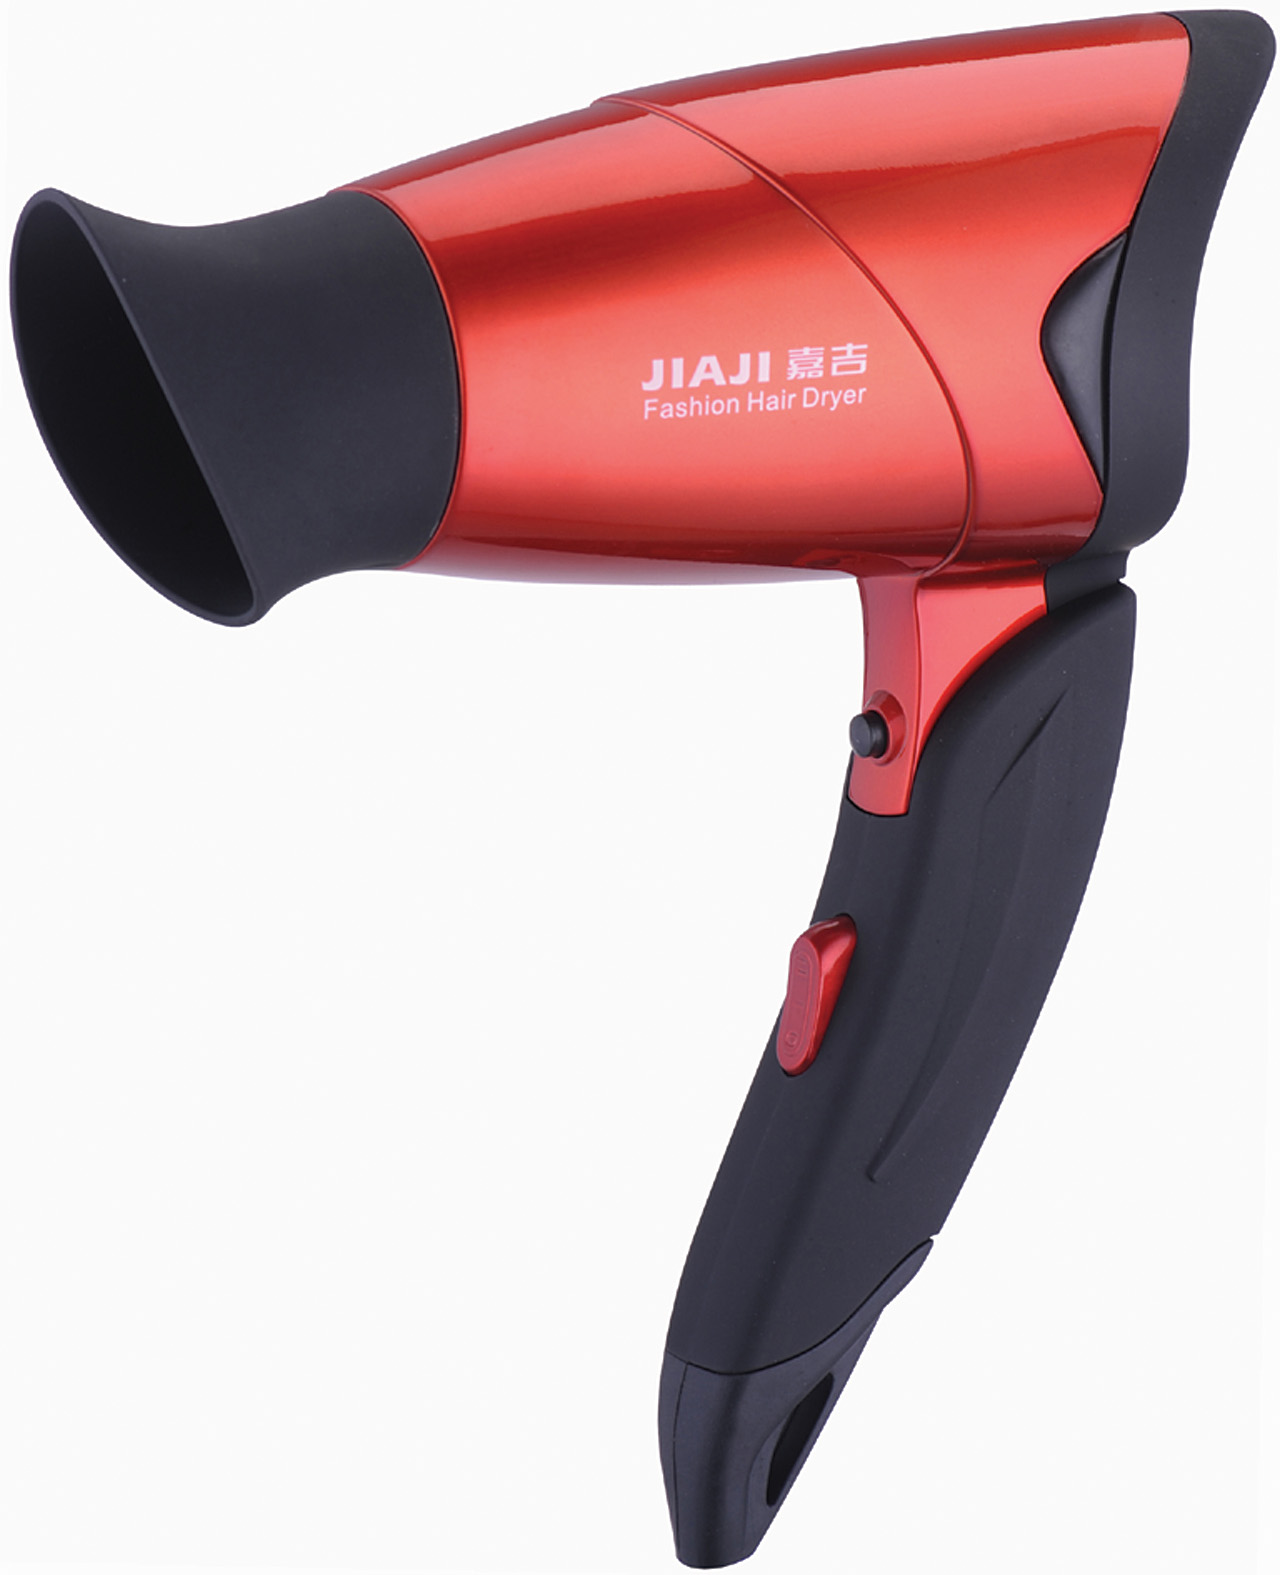 Hair Dryer, Hair Dryer Products, Hair Dryer Suppliers and ...